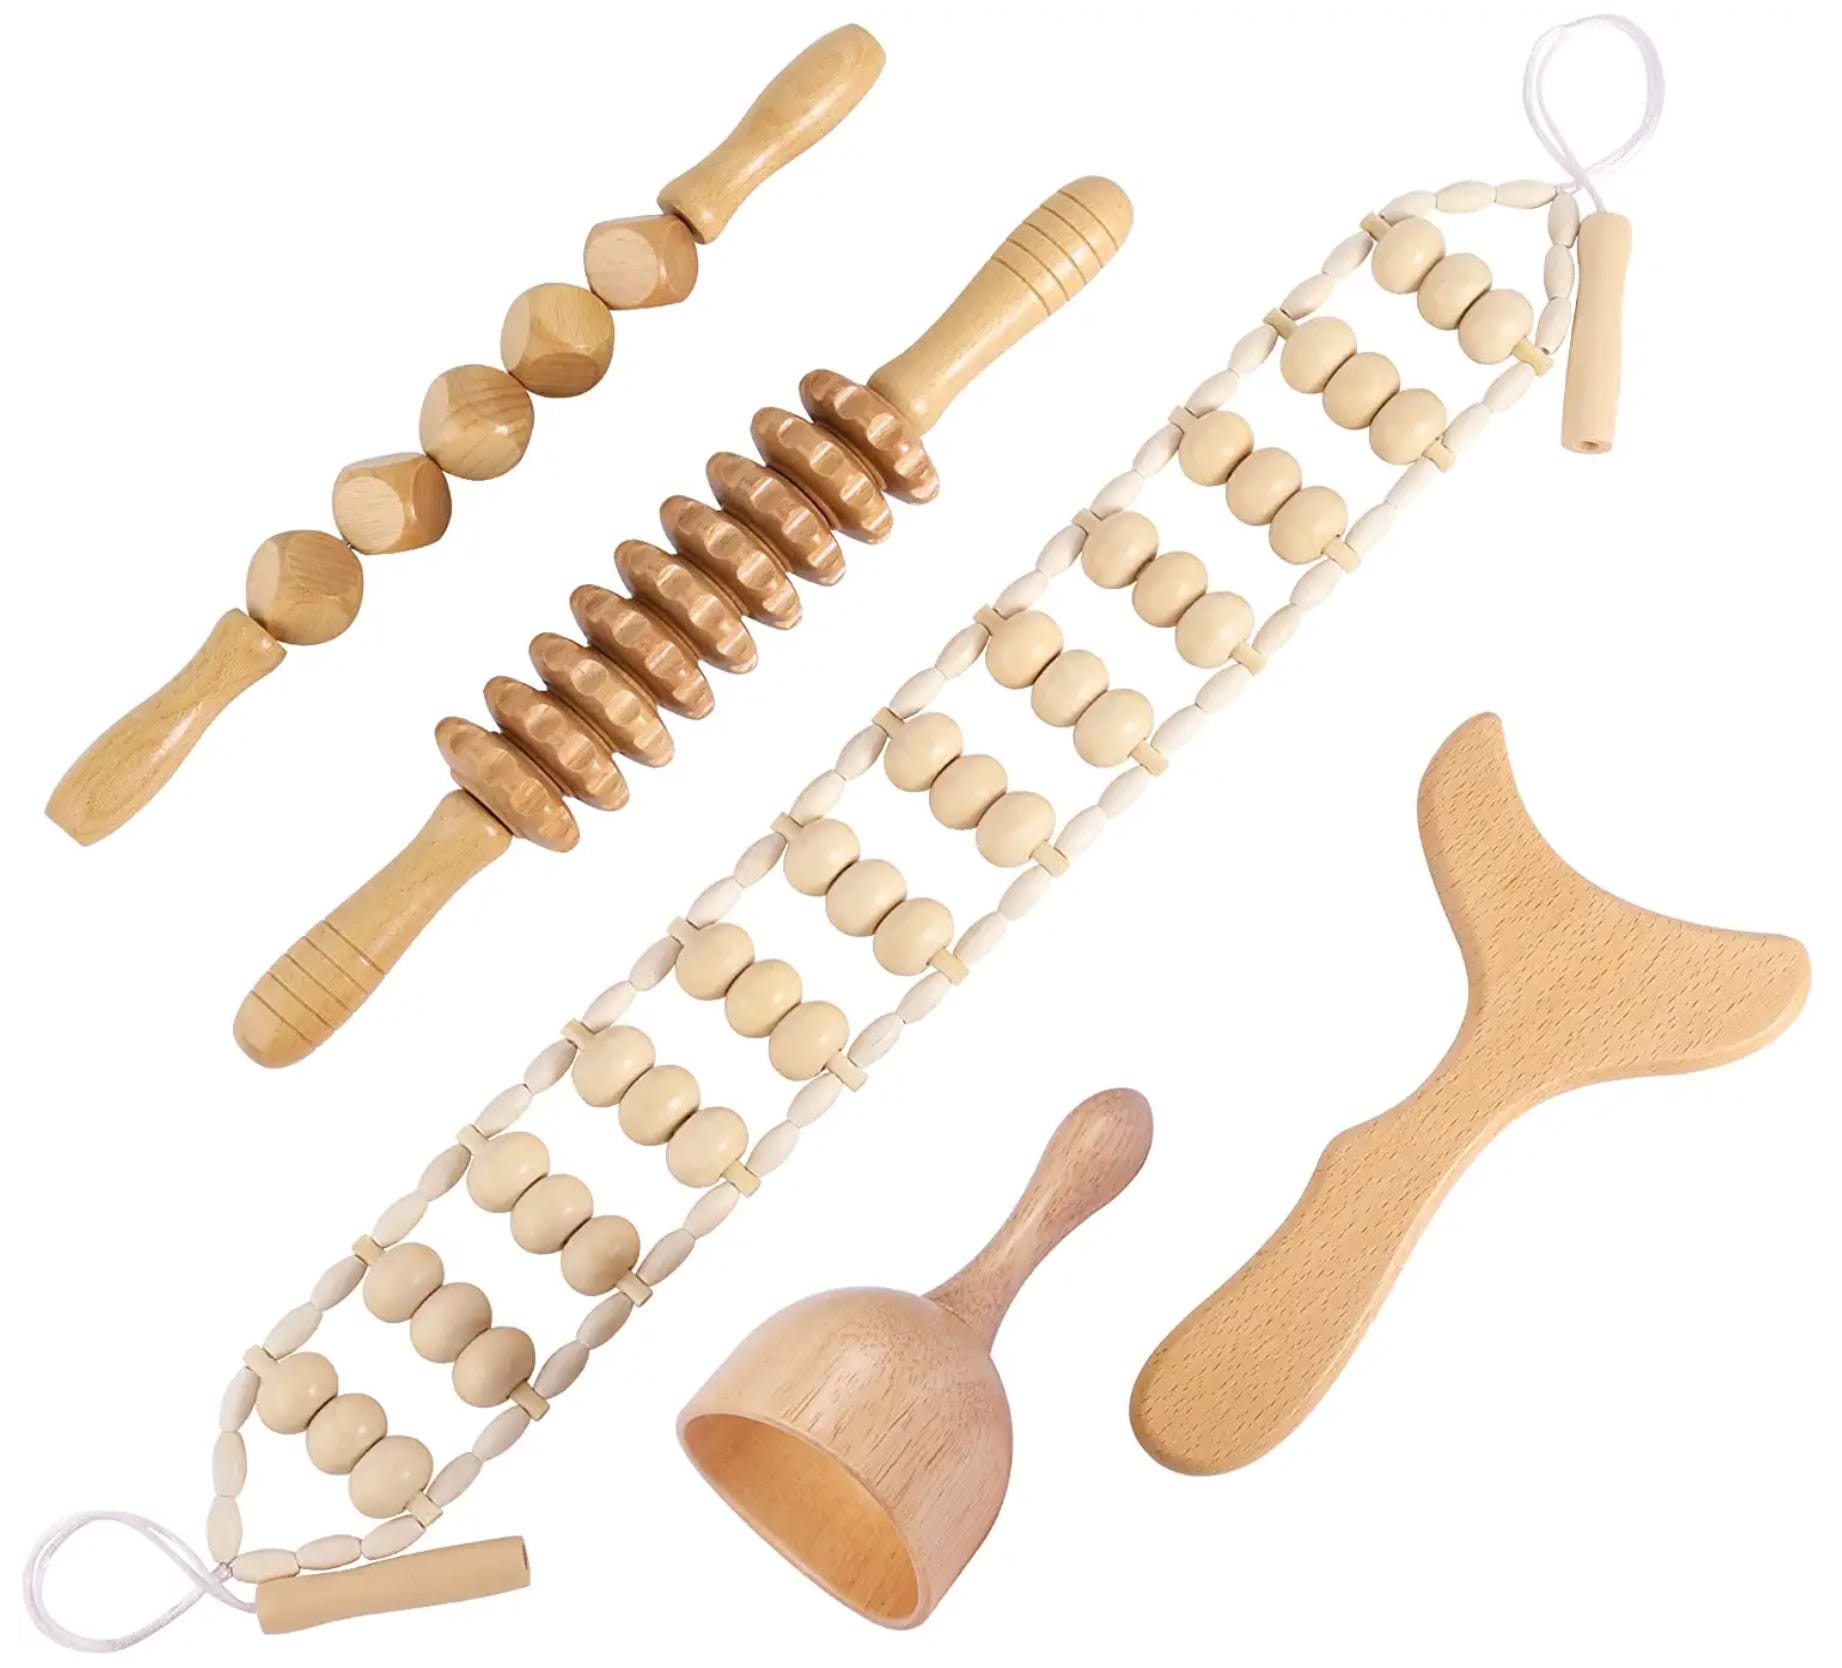 How to Use Wooden Massage Tools? - Wooden Earth